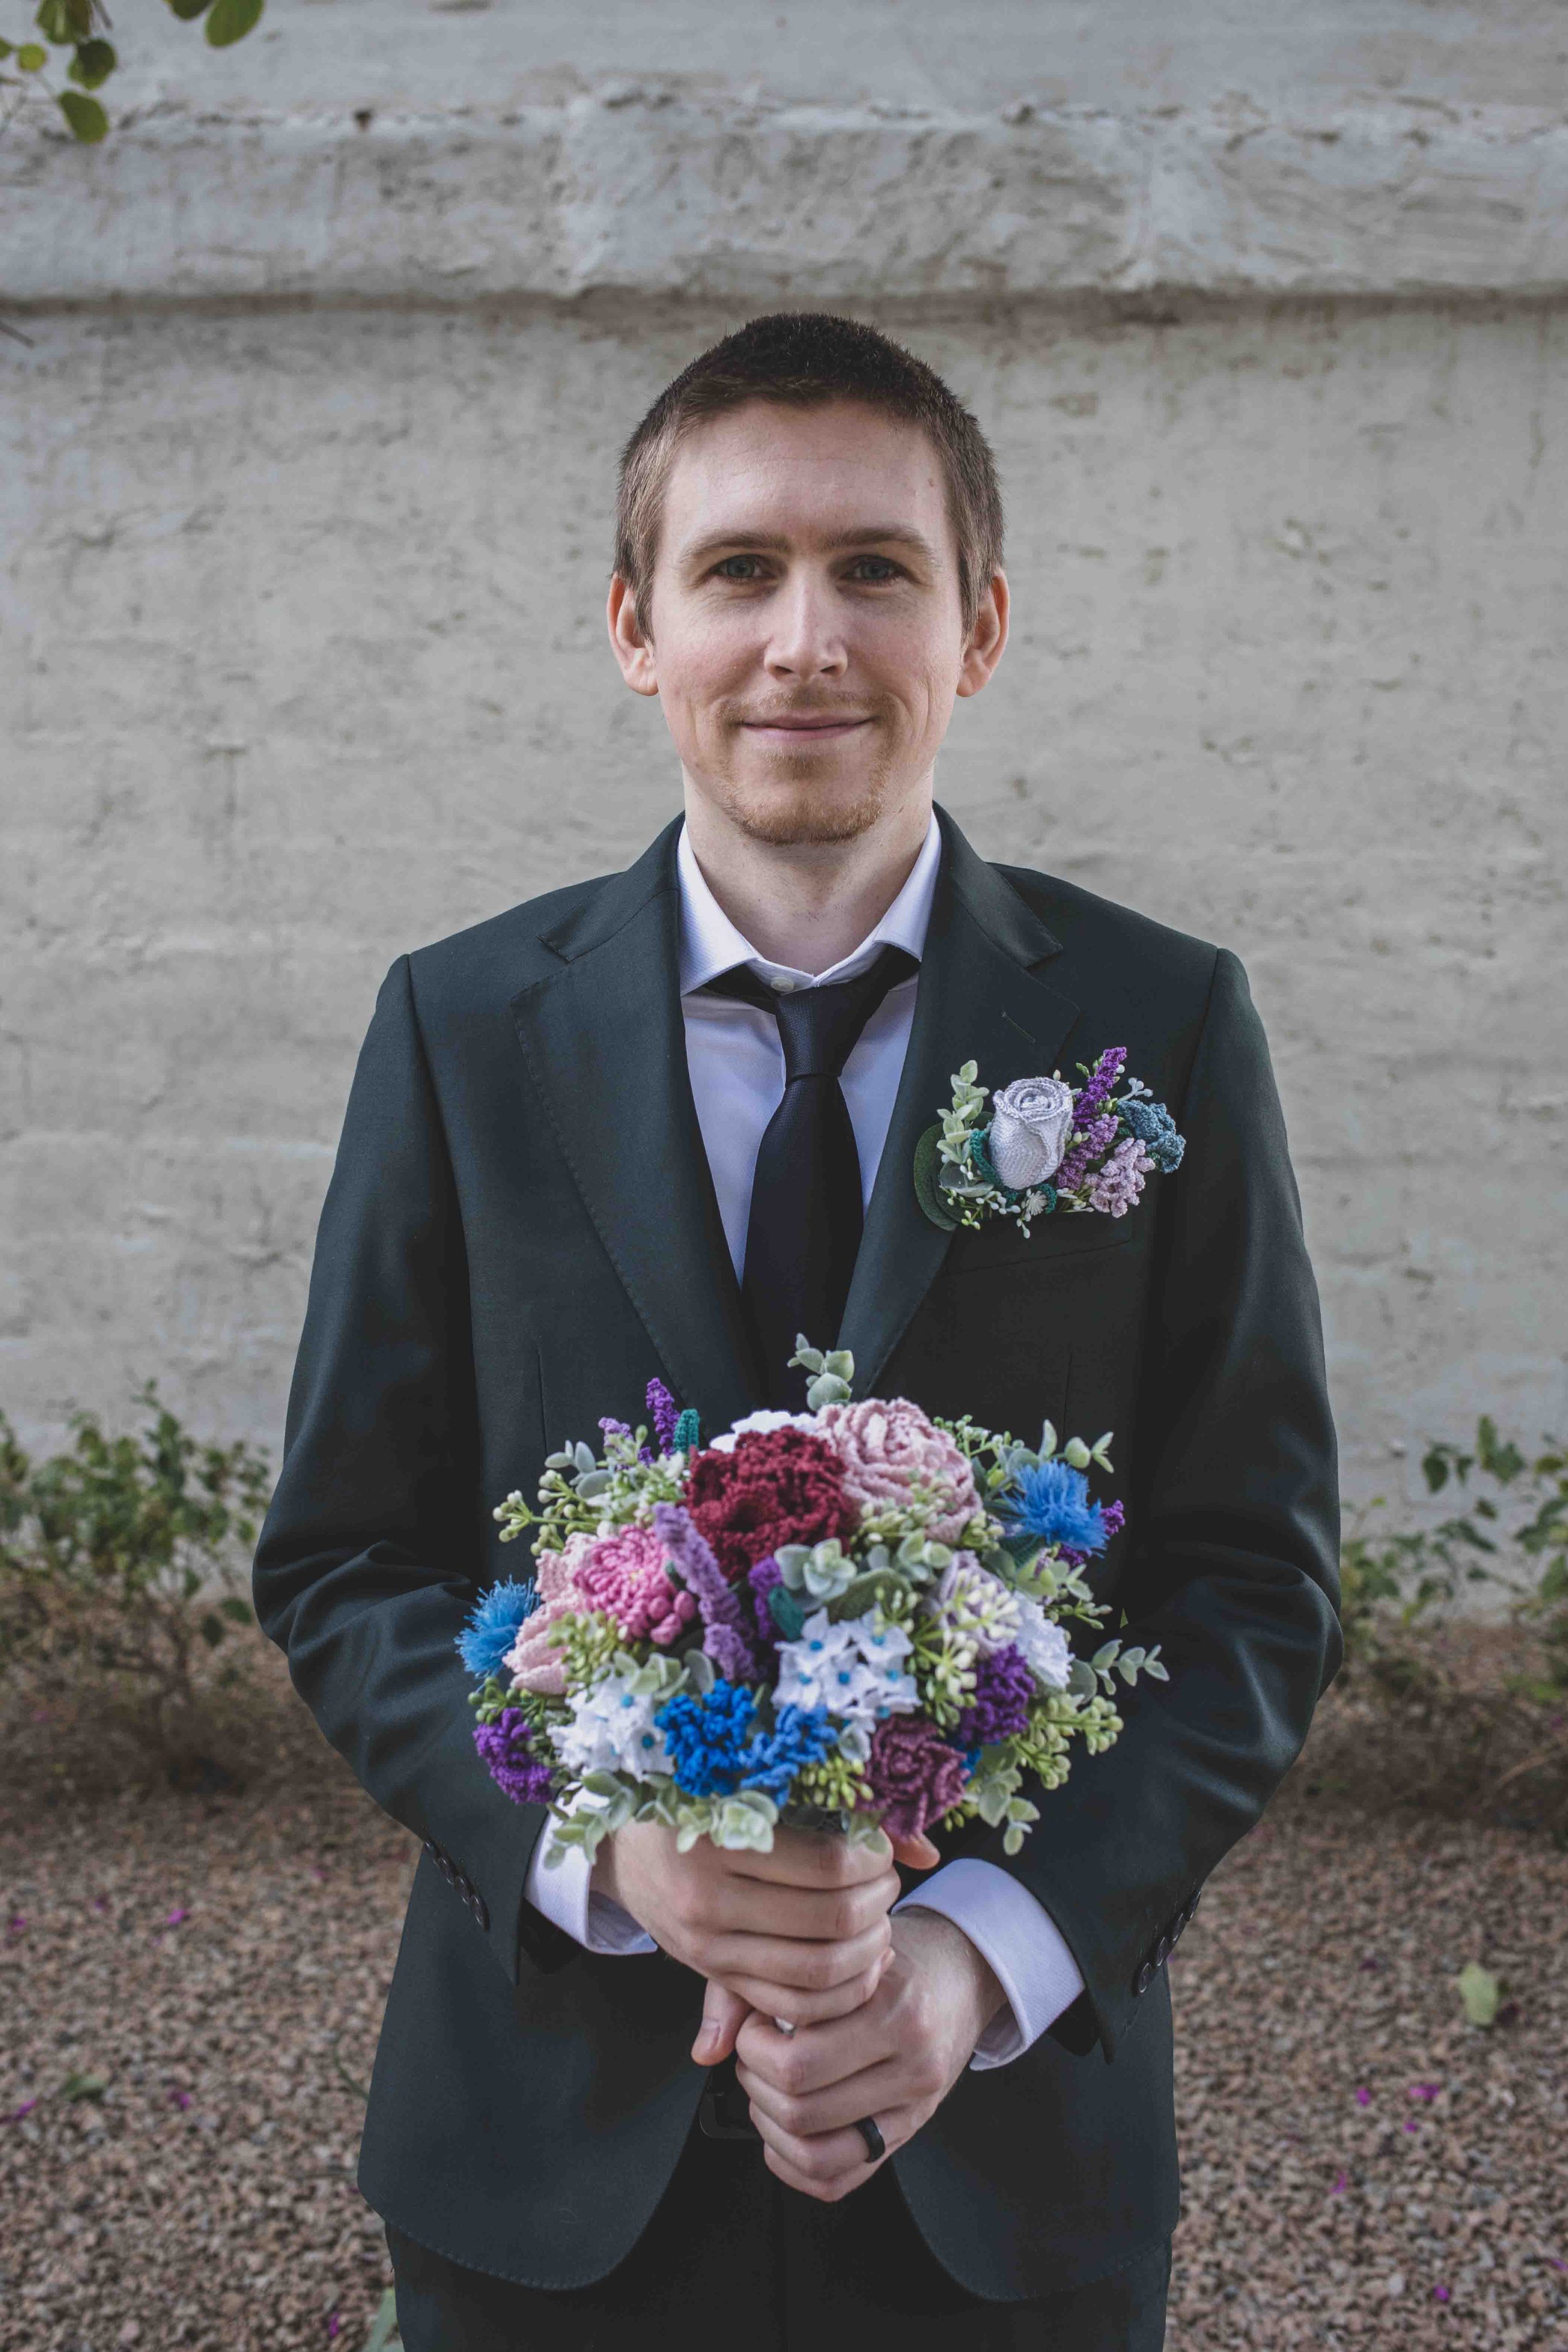 Groom holding the bride's bouquet for his wedding day by Gilbert, Arizona Wedding Photographer Jennifer Lind Schutsky.